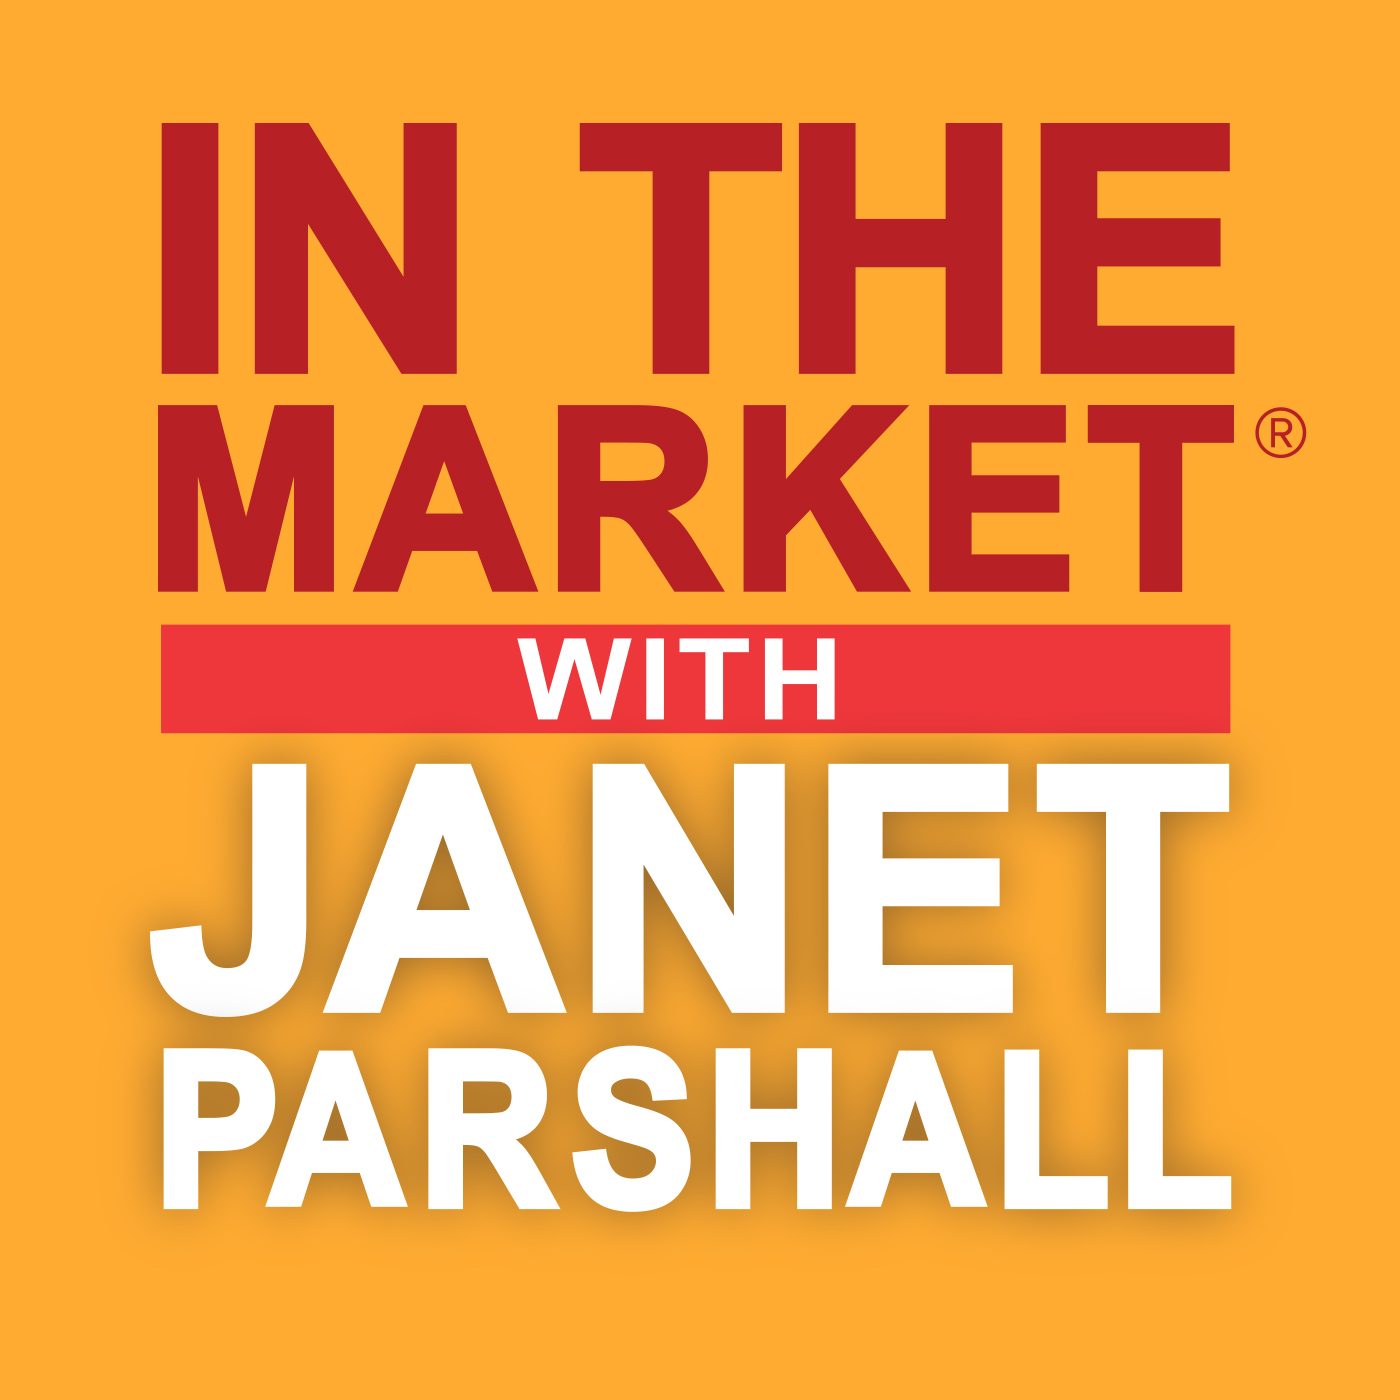  Best of In The Market with Janet Parshall: Are We Living In The End Times?